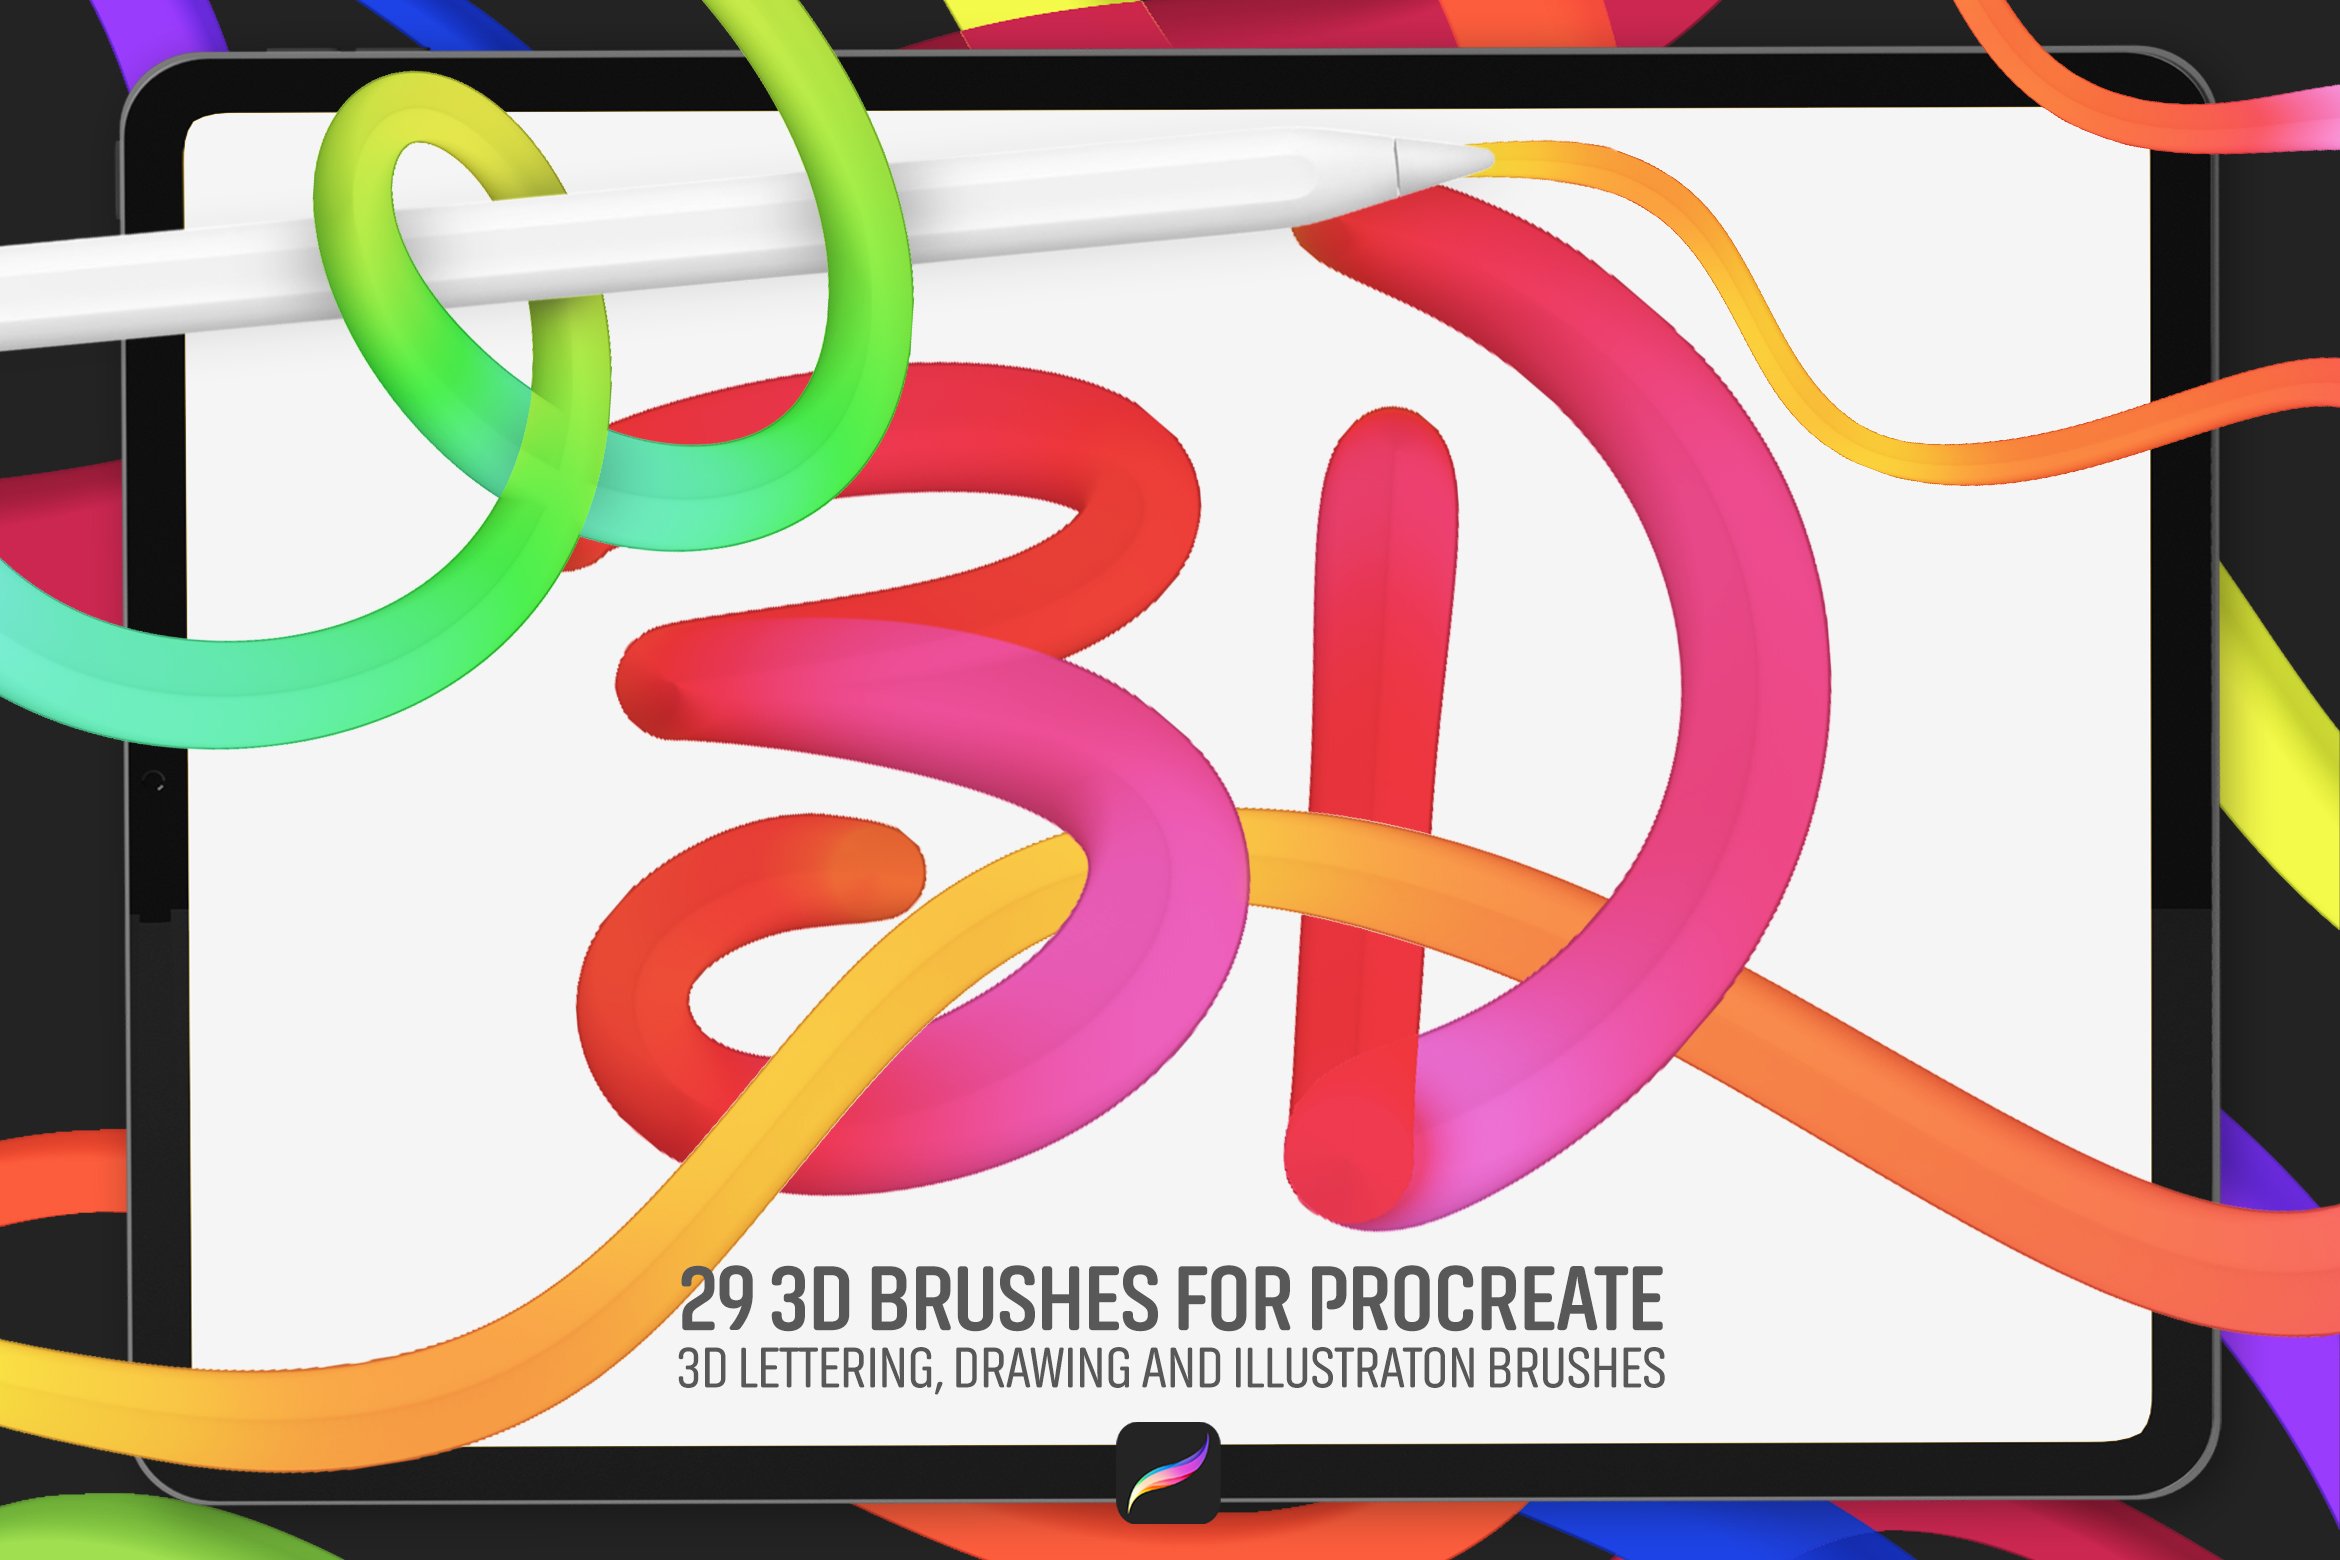 procreate 3d brushes free download